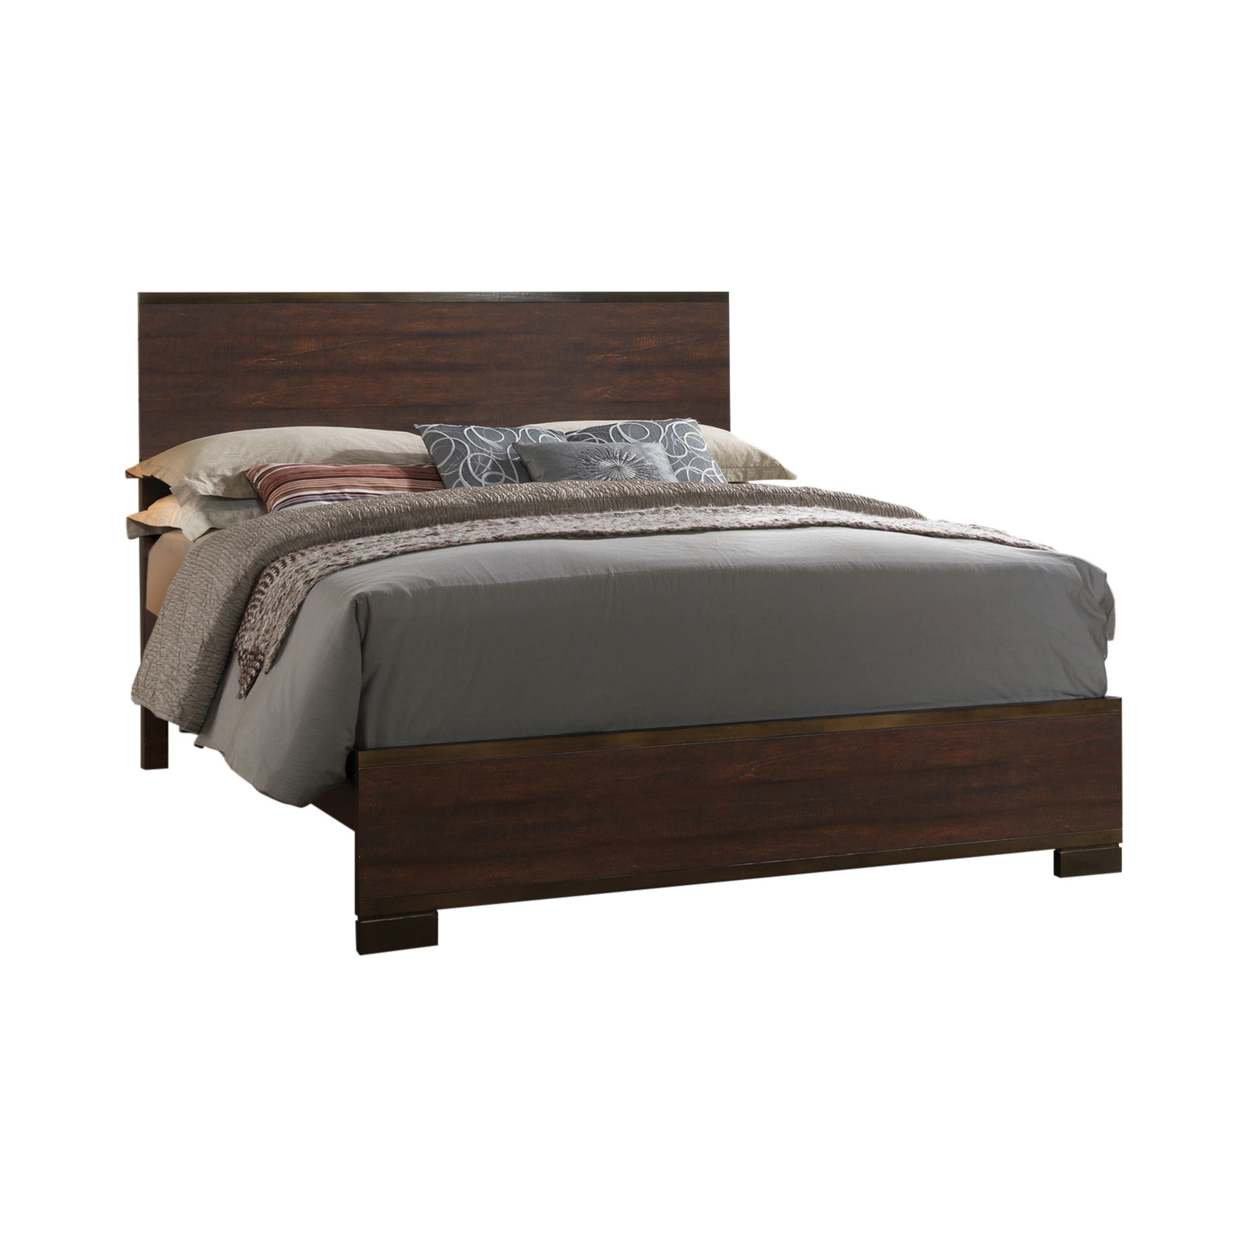 Transitional Style California King Size Panel Bed With Low Footboard, Brown- Saltoro Sherpi